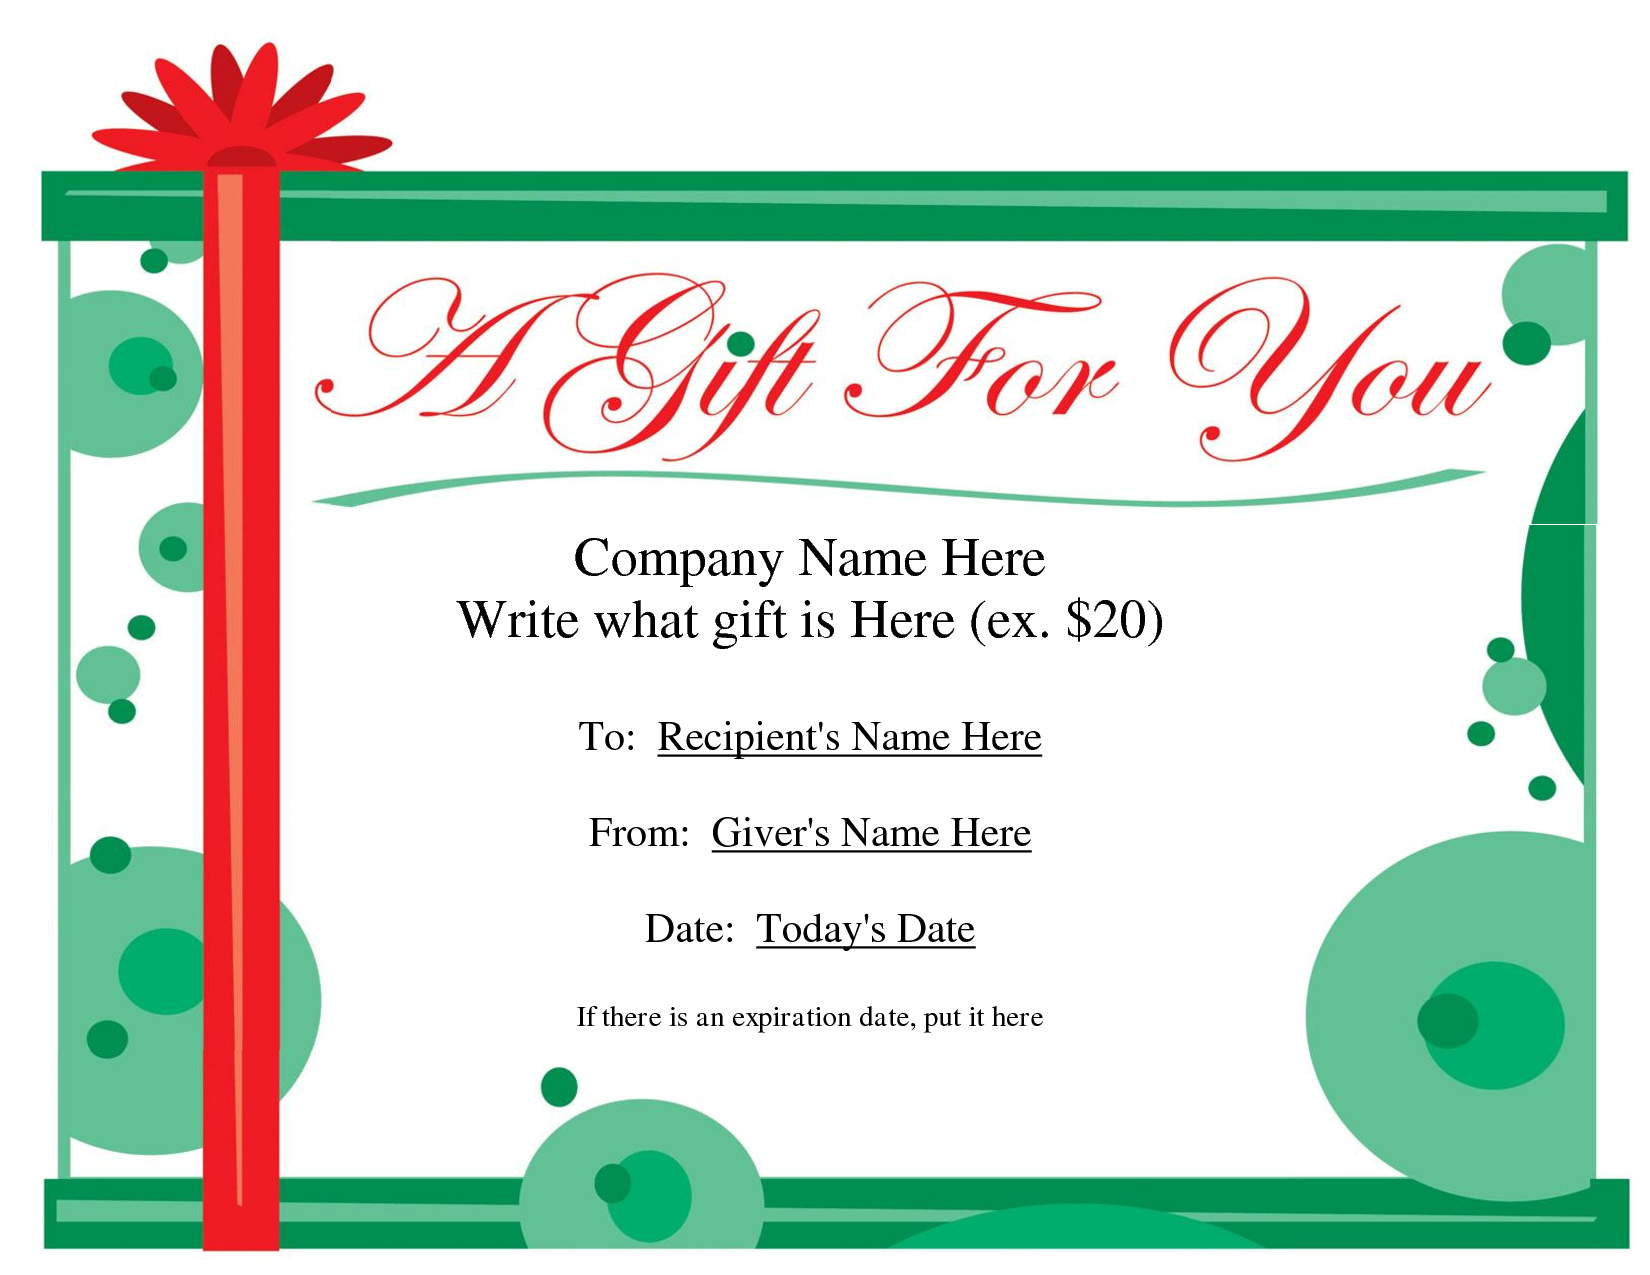 Free Christmas Gift Certificate Templates | Ideas For The House - Free Printable Gift Vouchers Uk